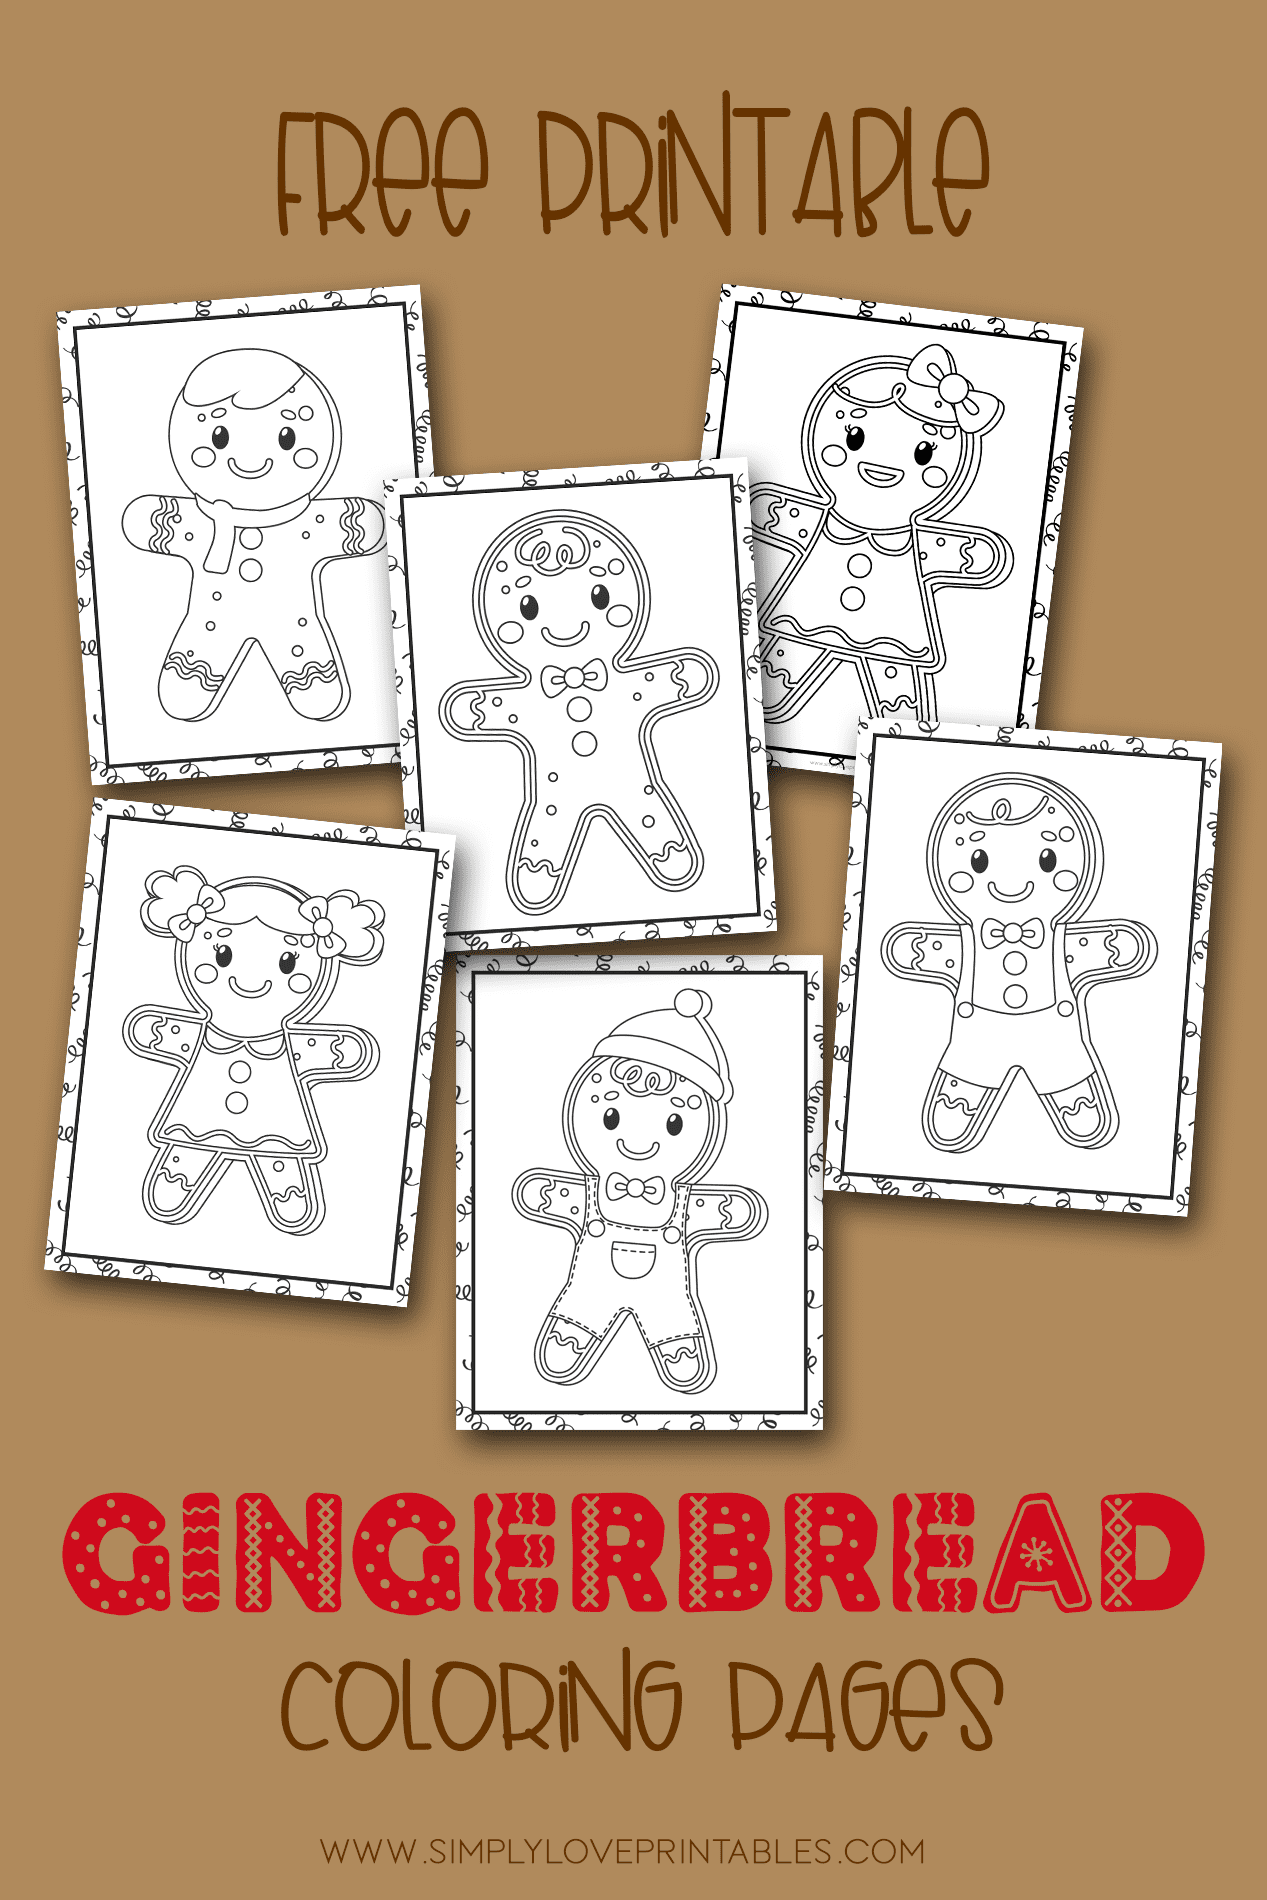 The gingerbread man coloring pages archives